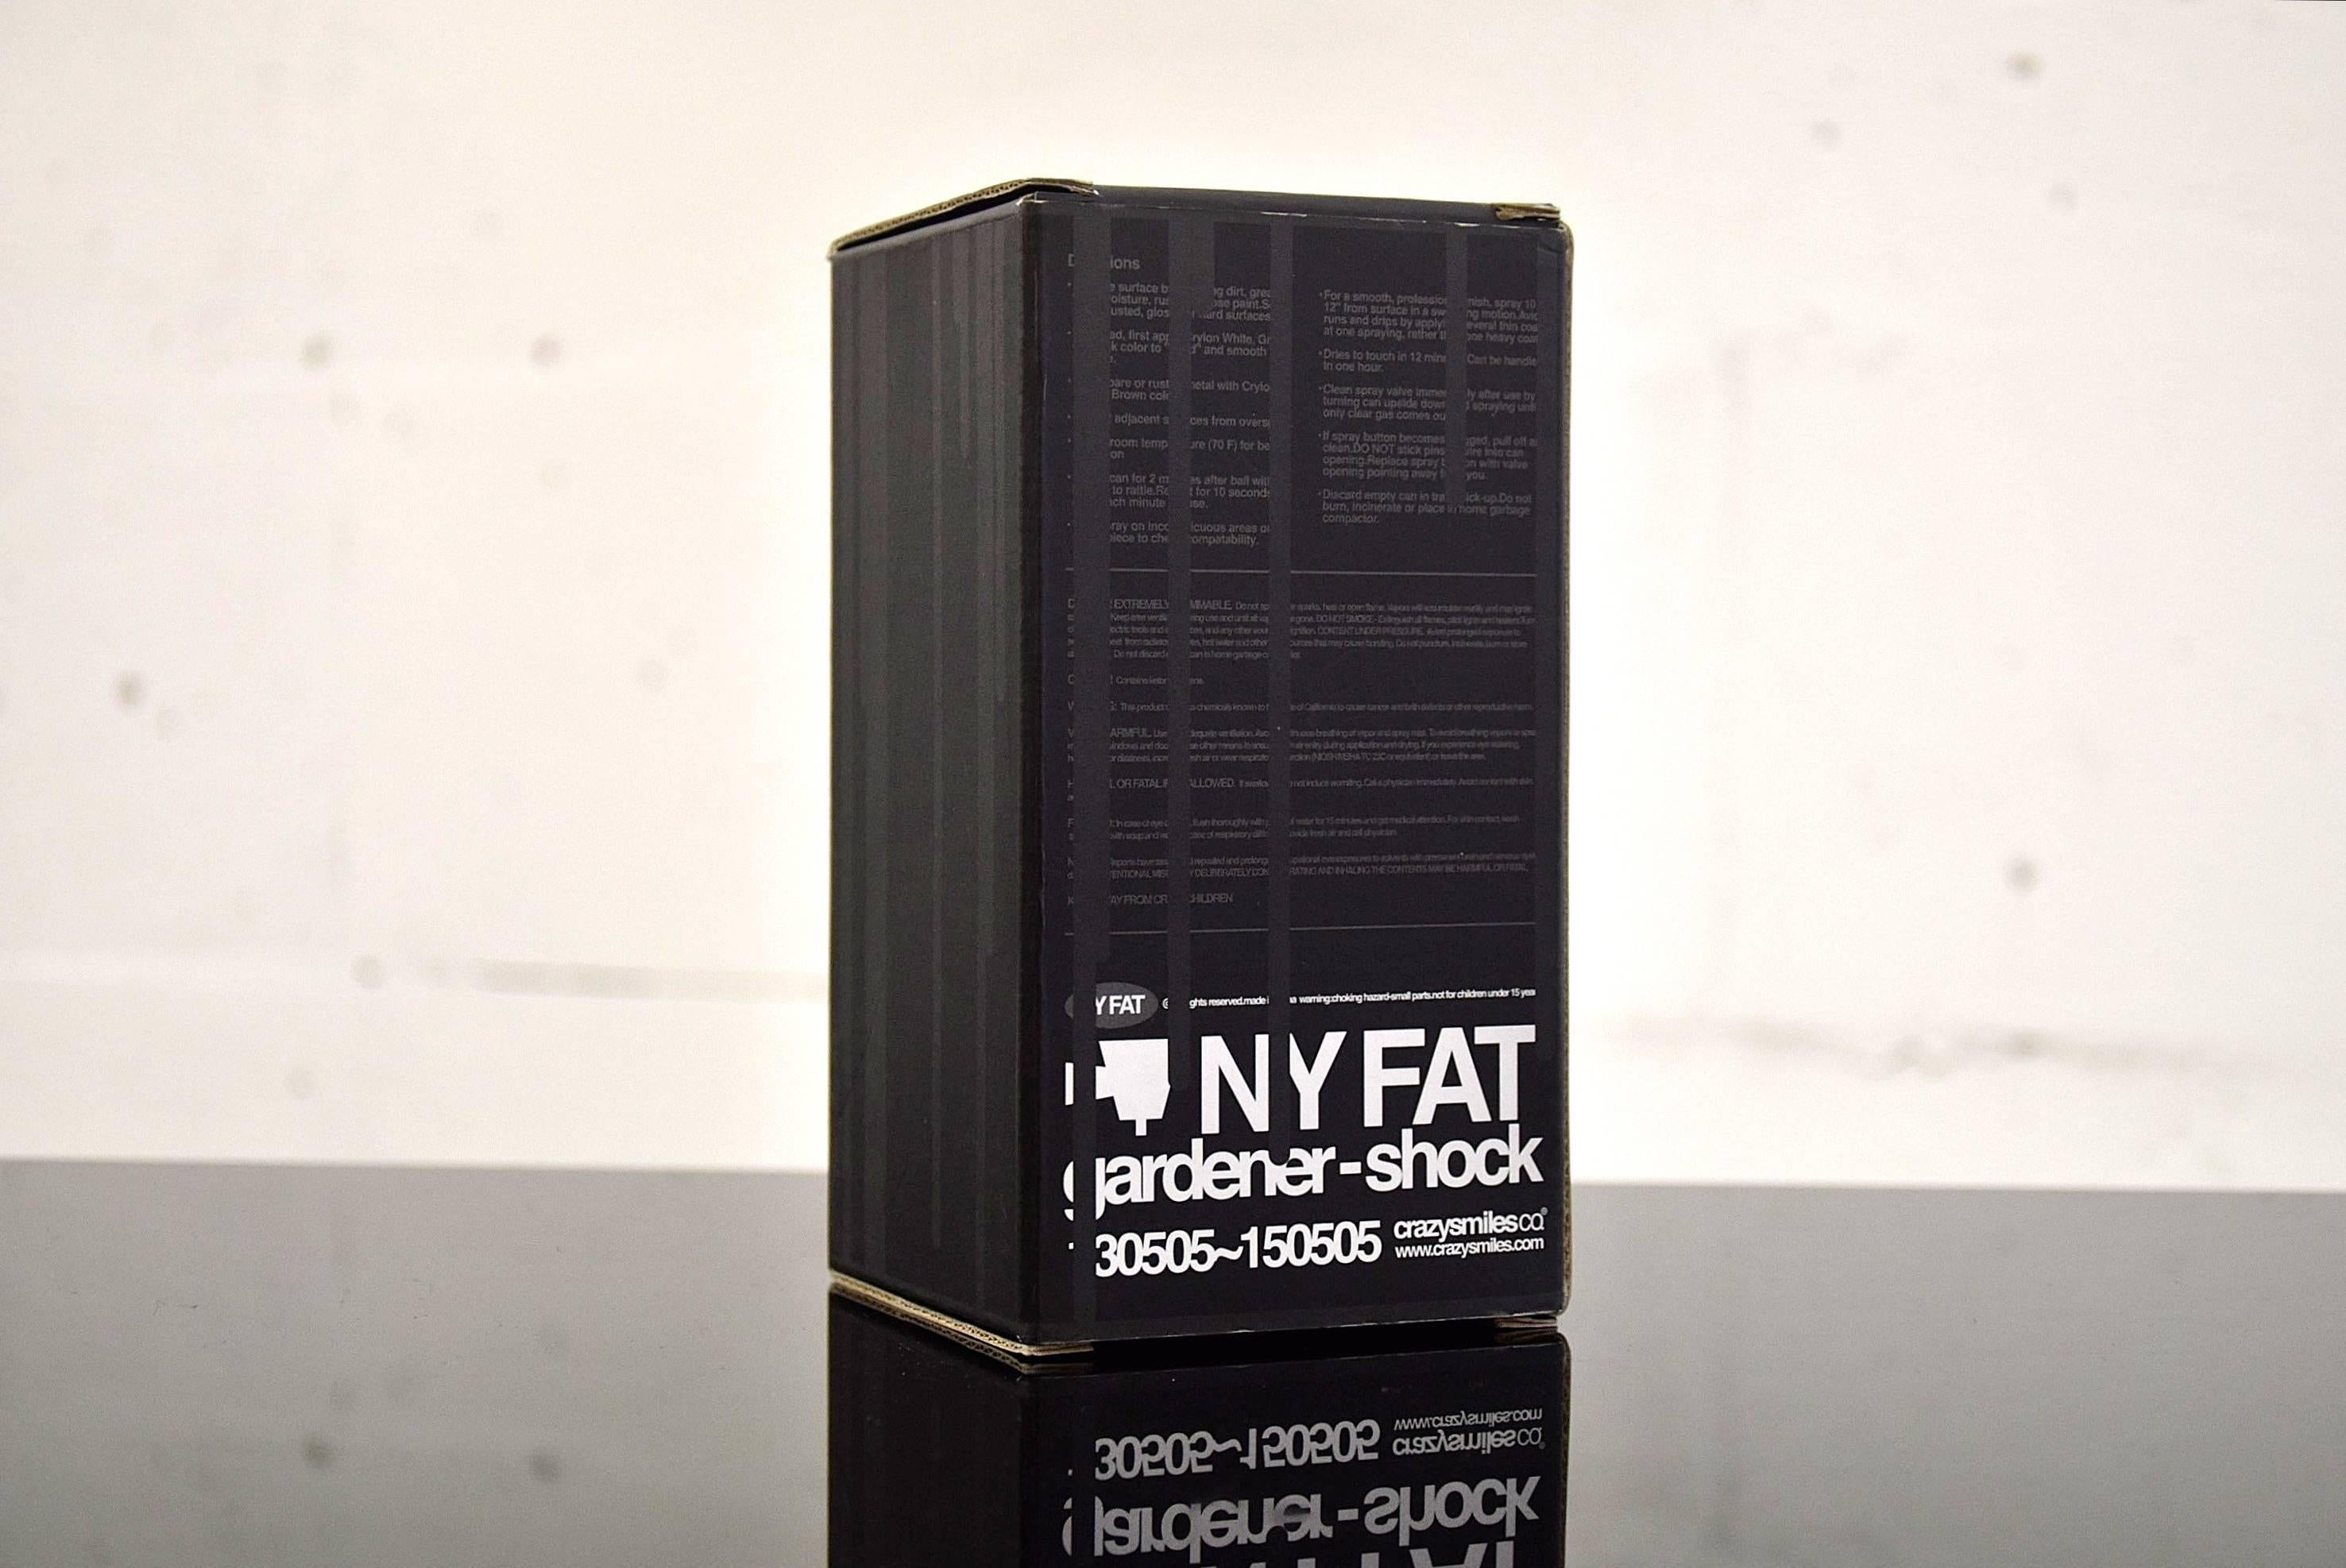 Contemporary NY Fat Designer Toy by Michael Lay, 2005